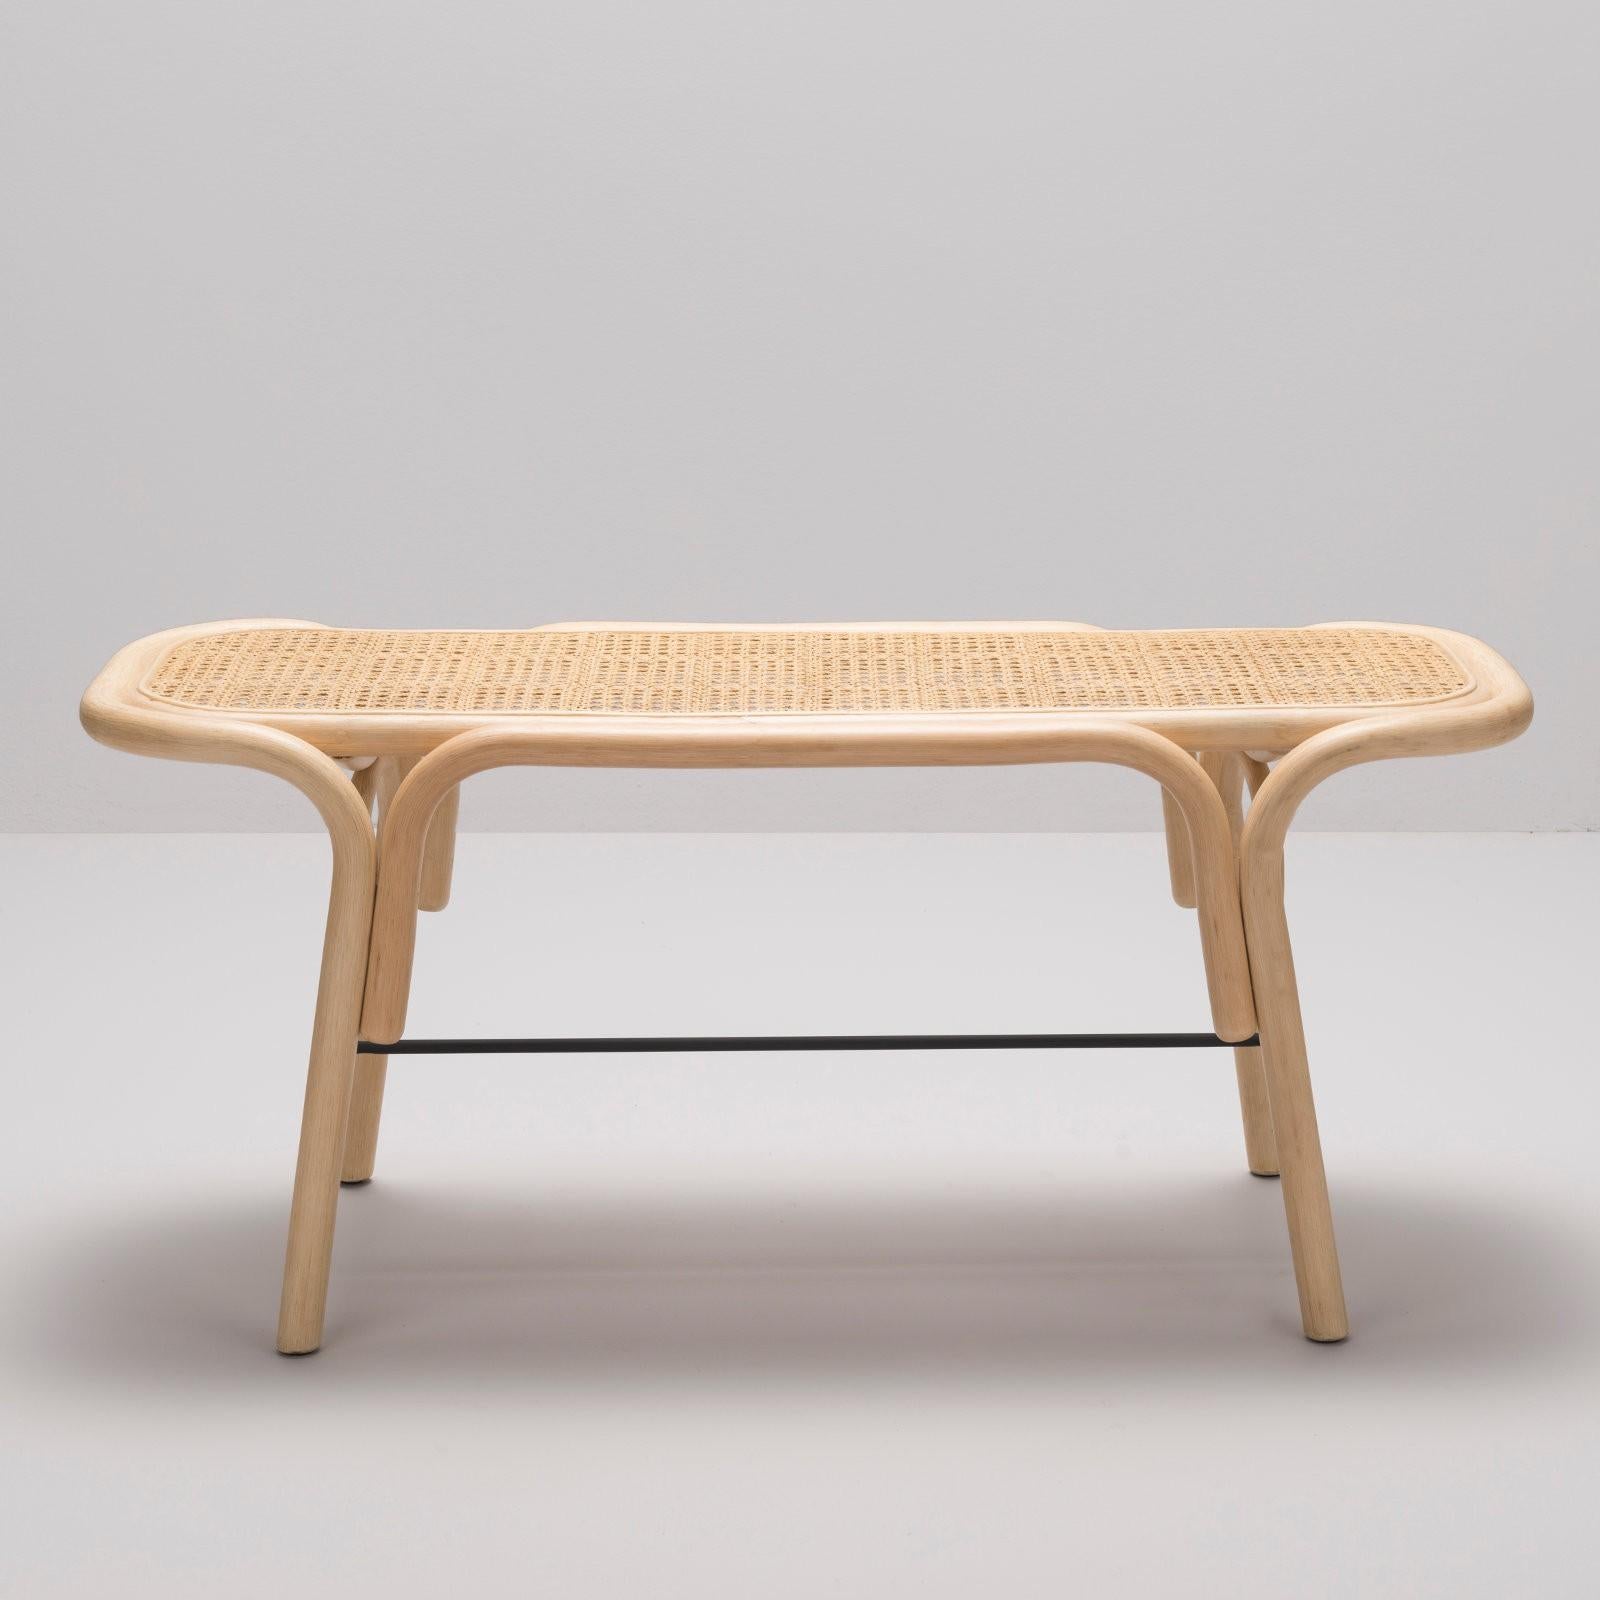 Contemporary French Design Bench in Rattan Structure and Cane Seat